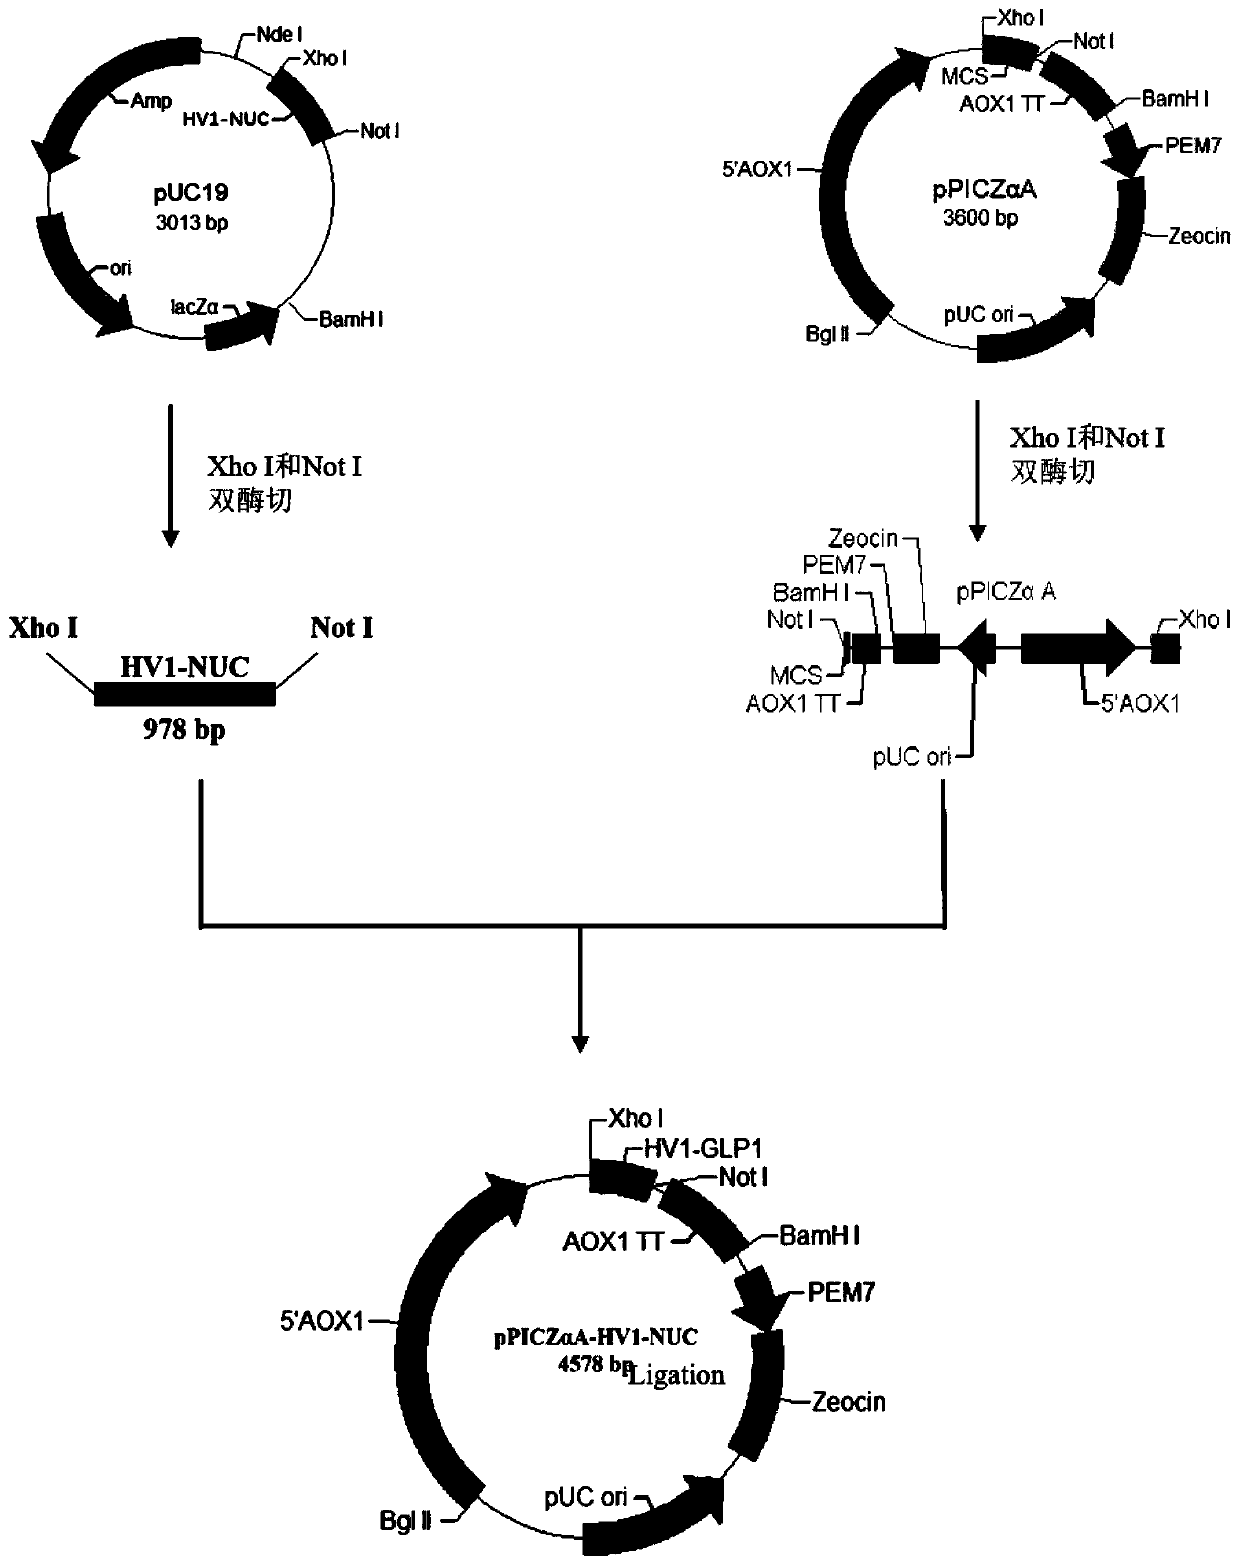 Method for preparing serratia nuclease through efficient secretory fusion expression and recombination in methylotrophic yeast